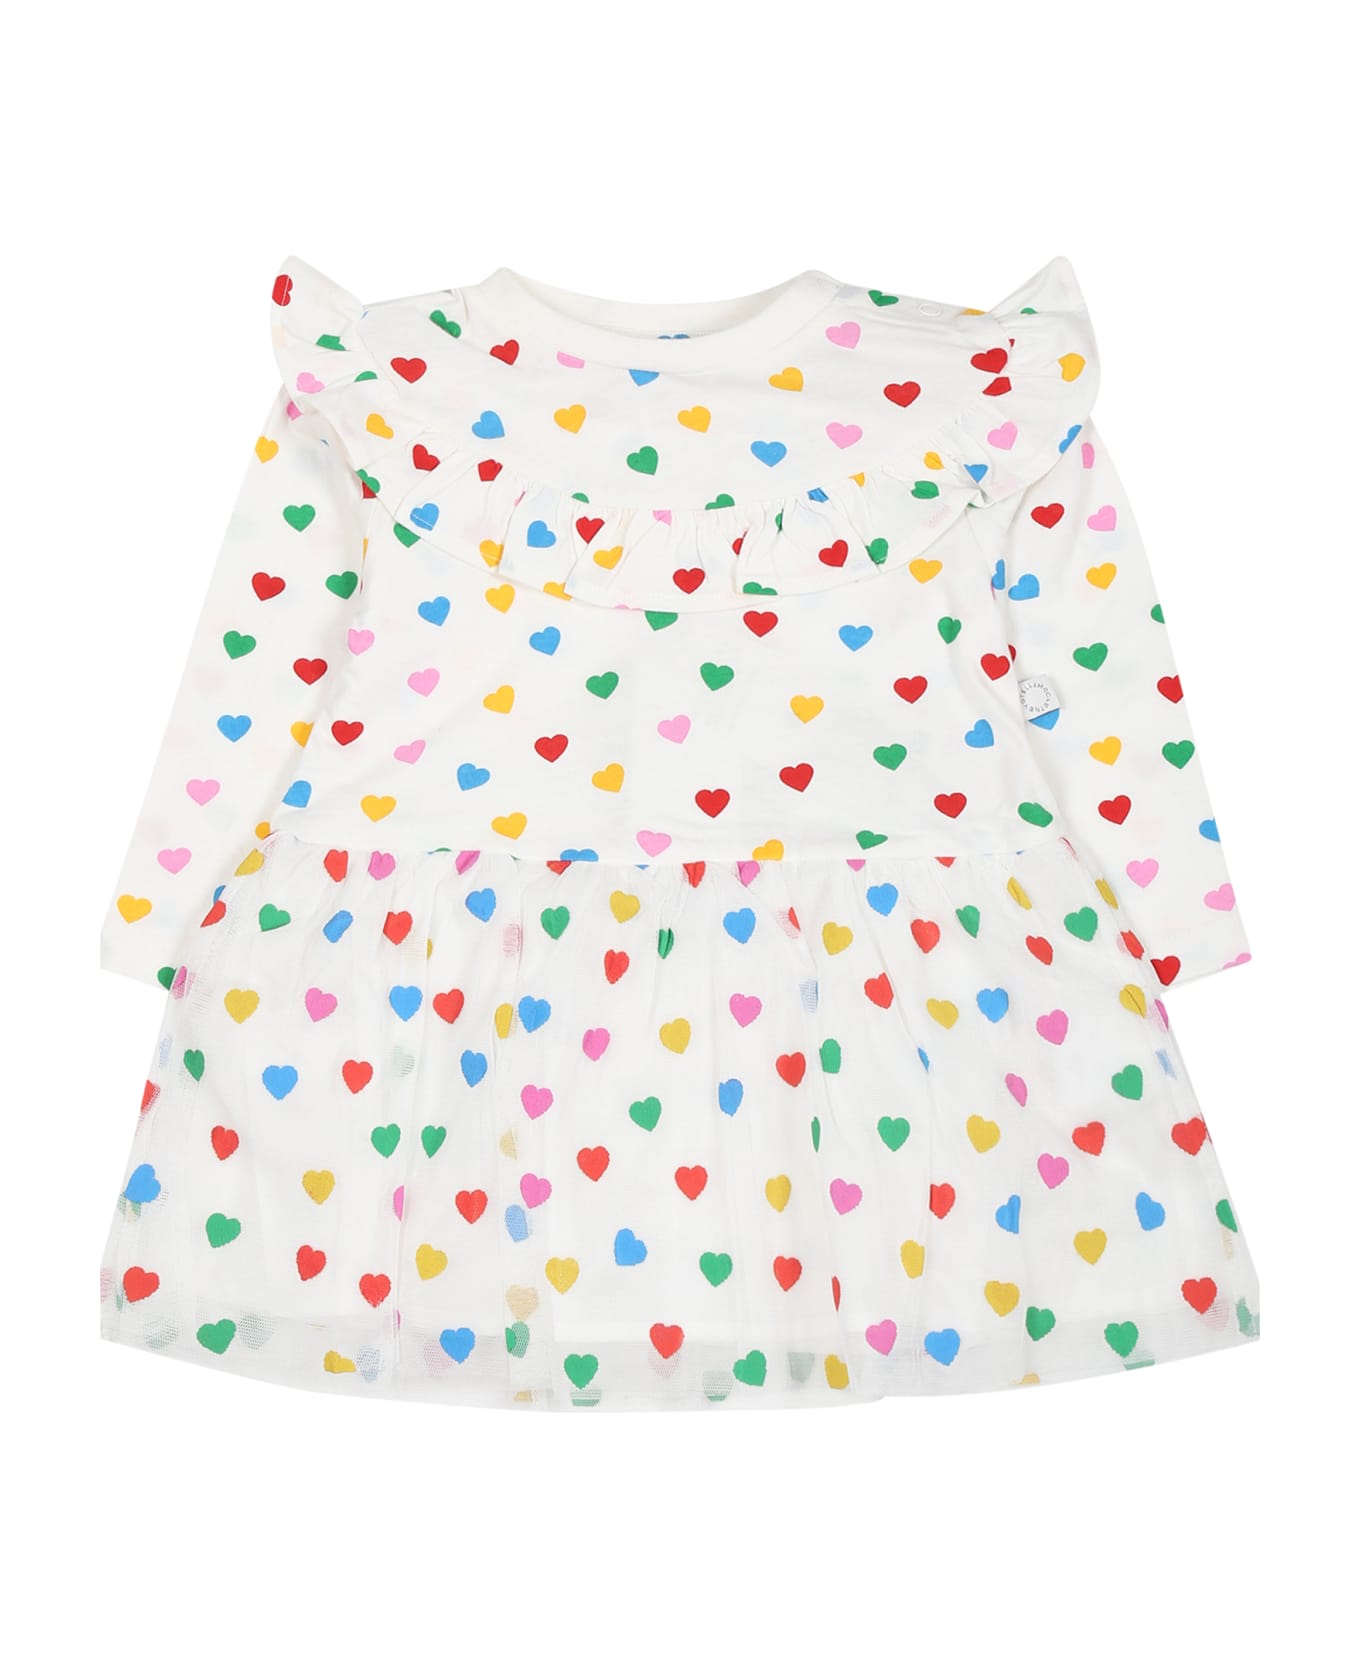 Stella McCartney Kids White Dress For Baby Girl With Hearts Print - White